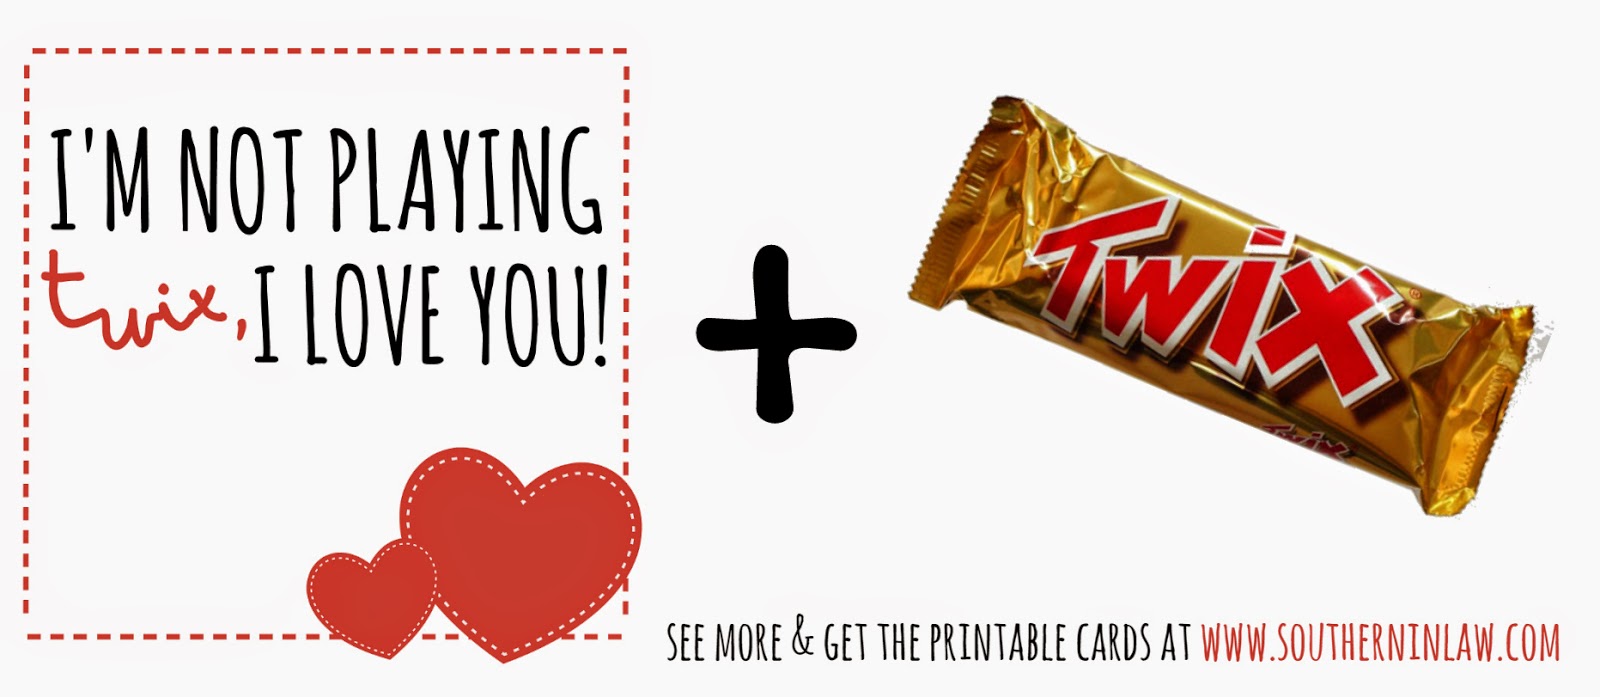 I'm not playing twix, I love you - Twix Bar Valentines Gift Idea - Punny Valentines Gift Ideas Free Printable Valentines Cards